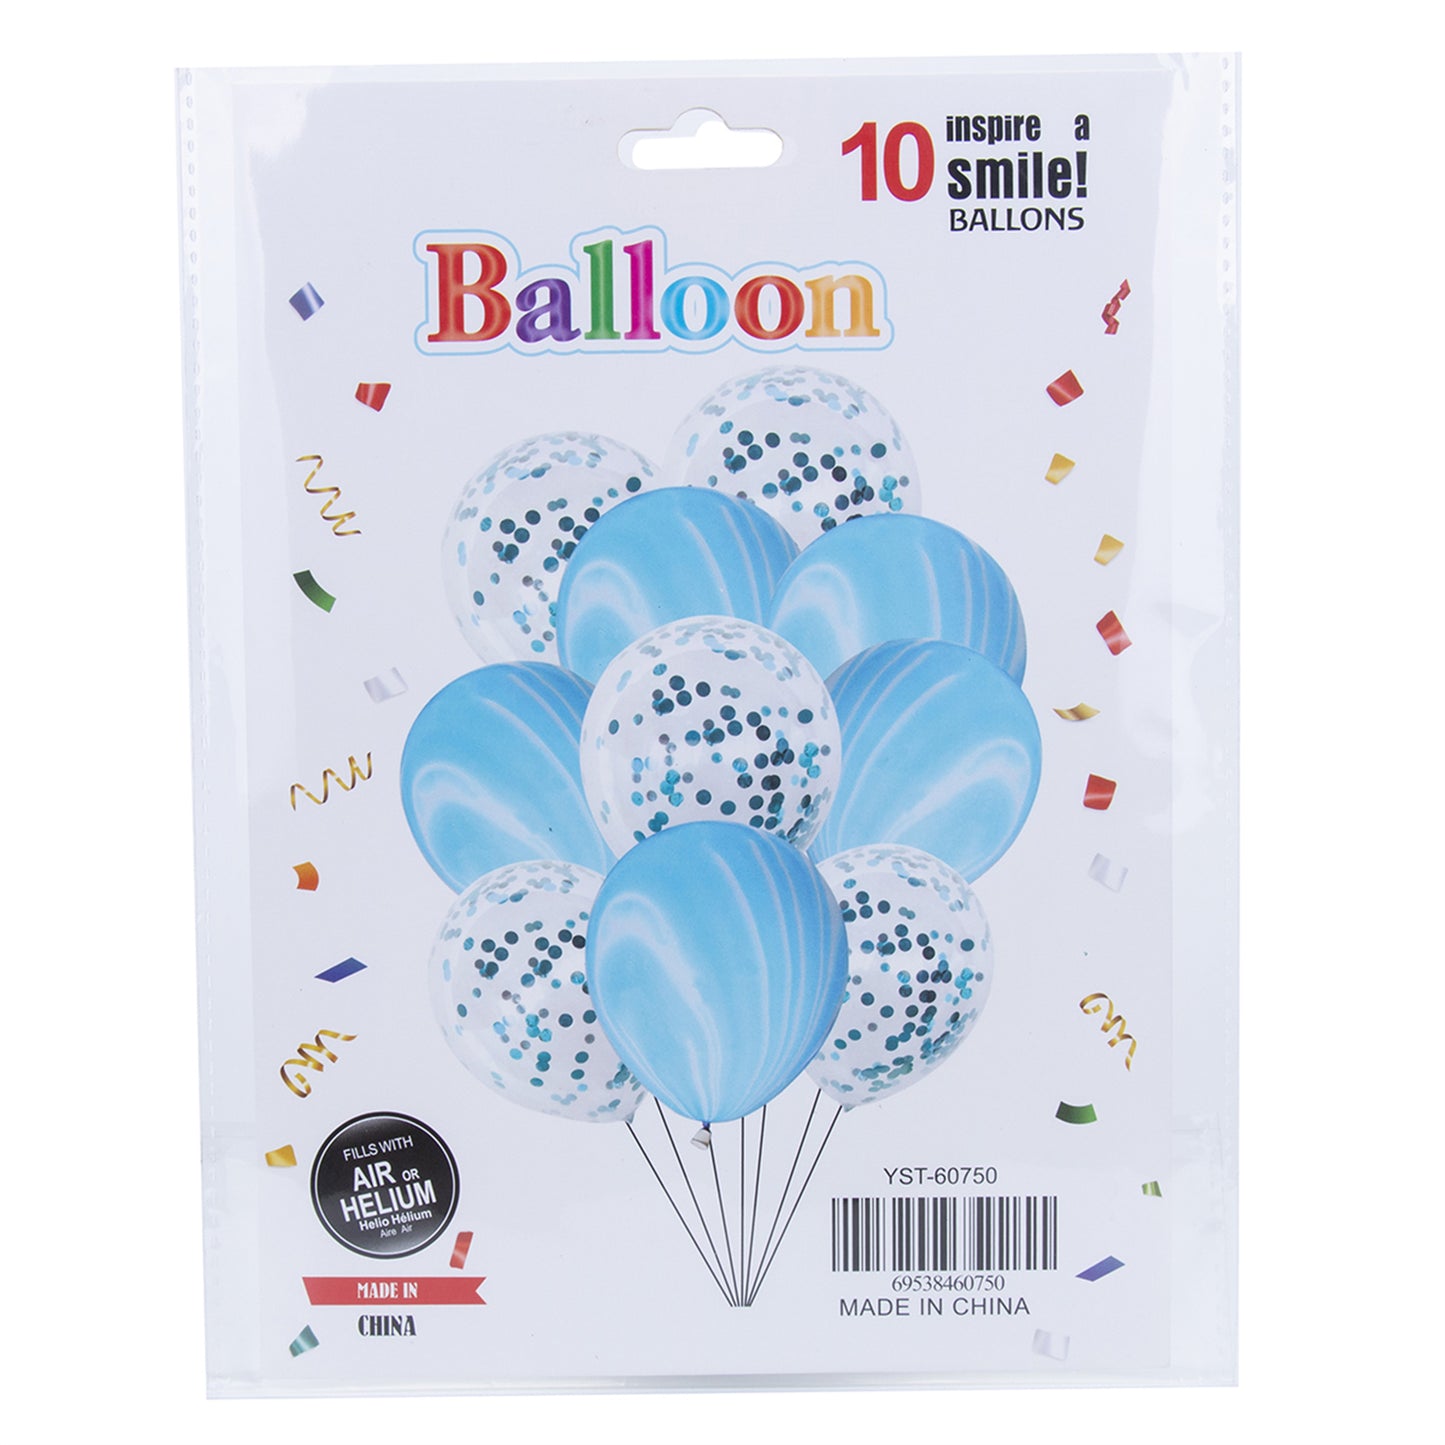 Party balloon themed party